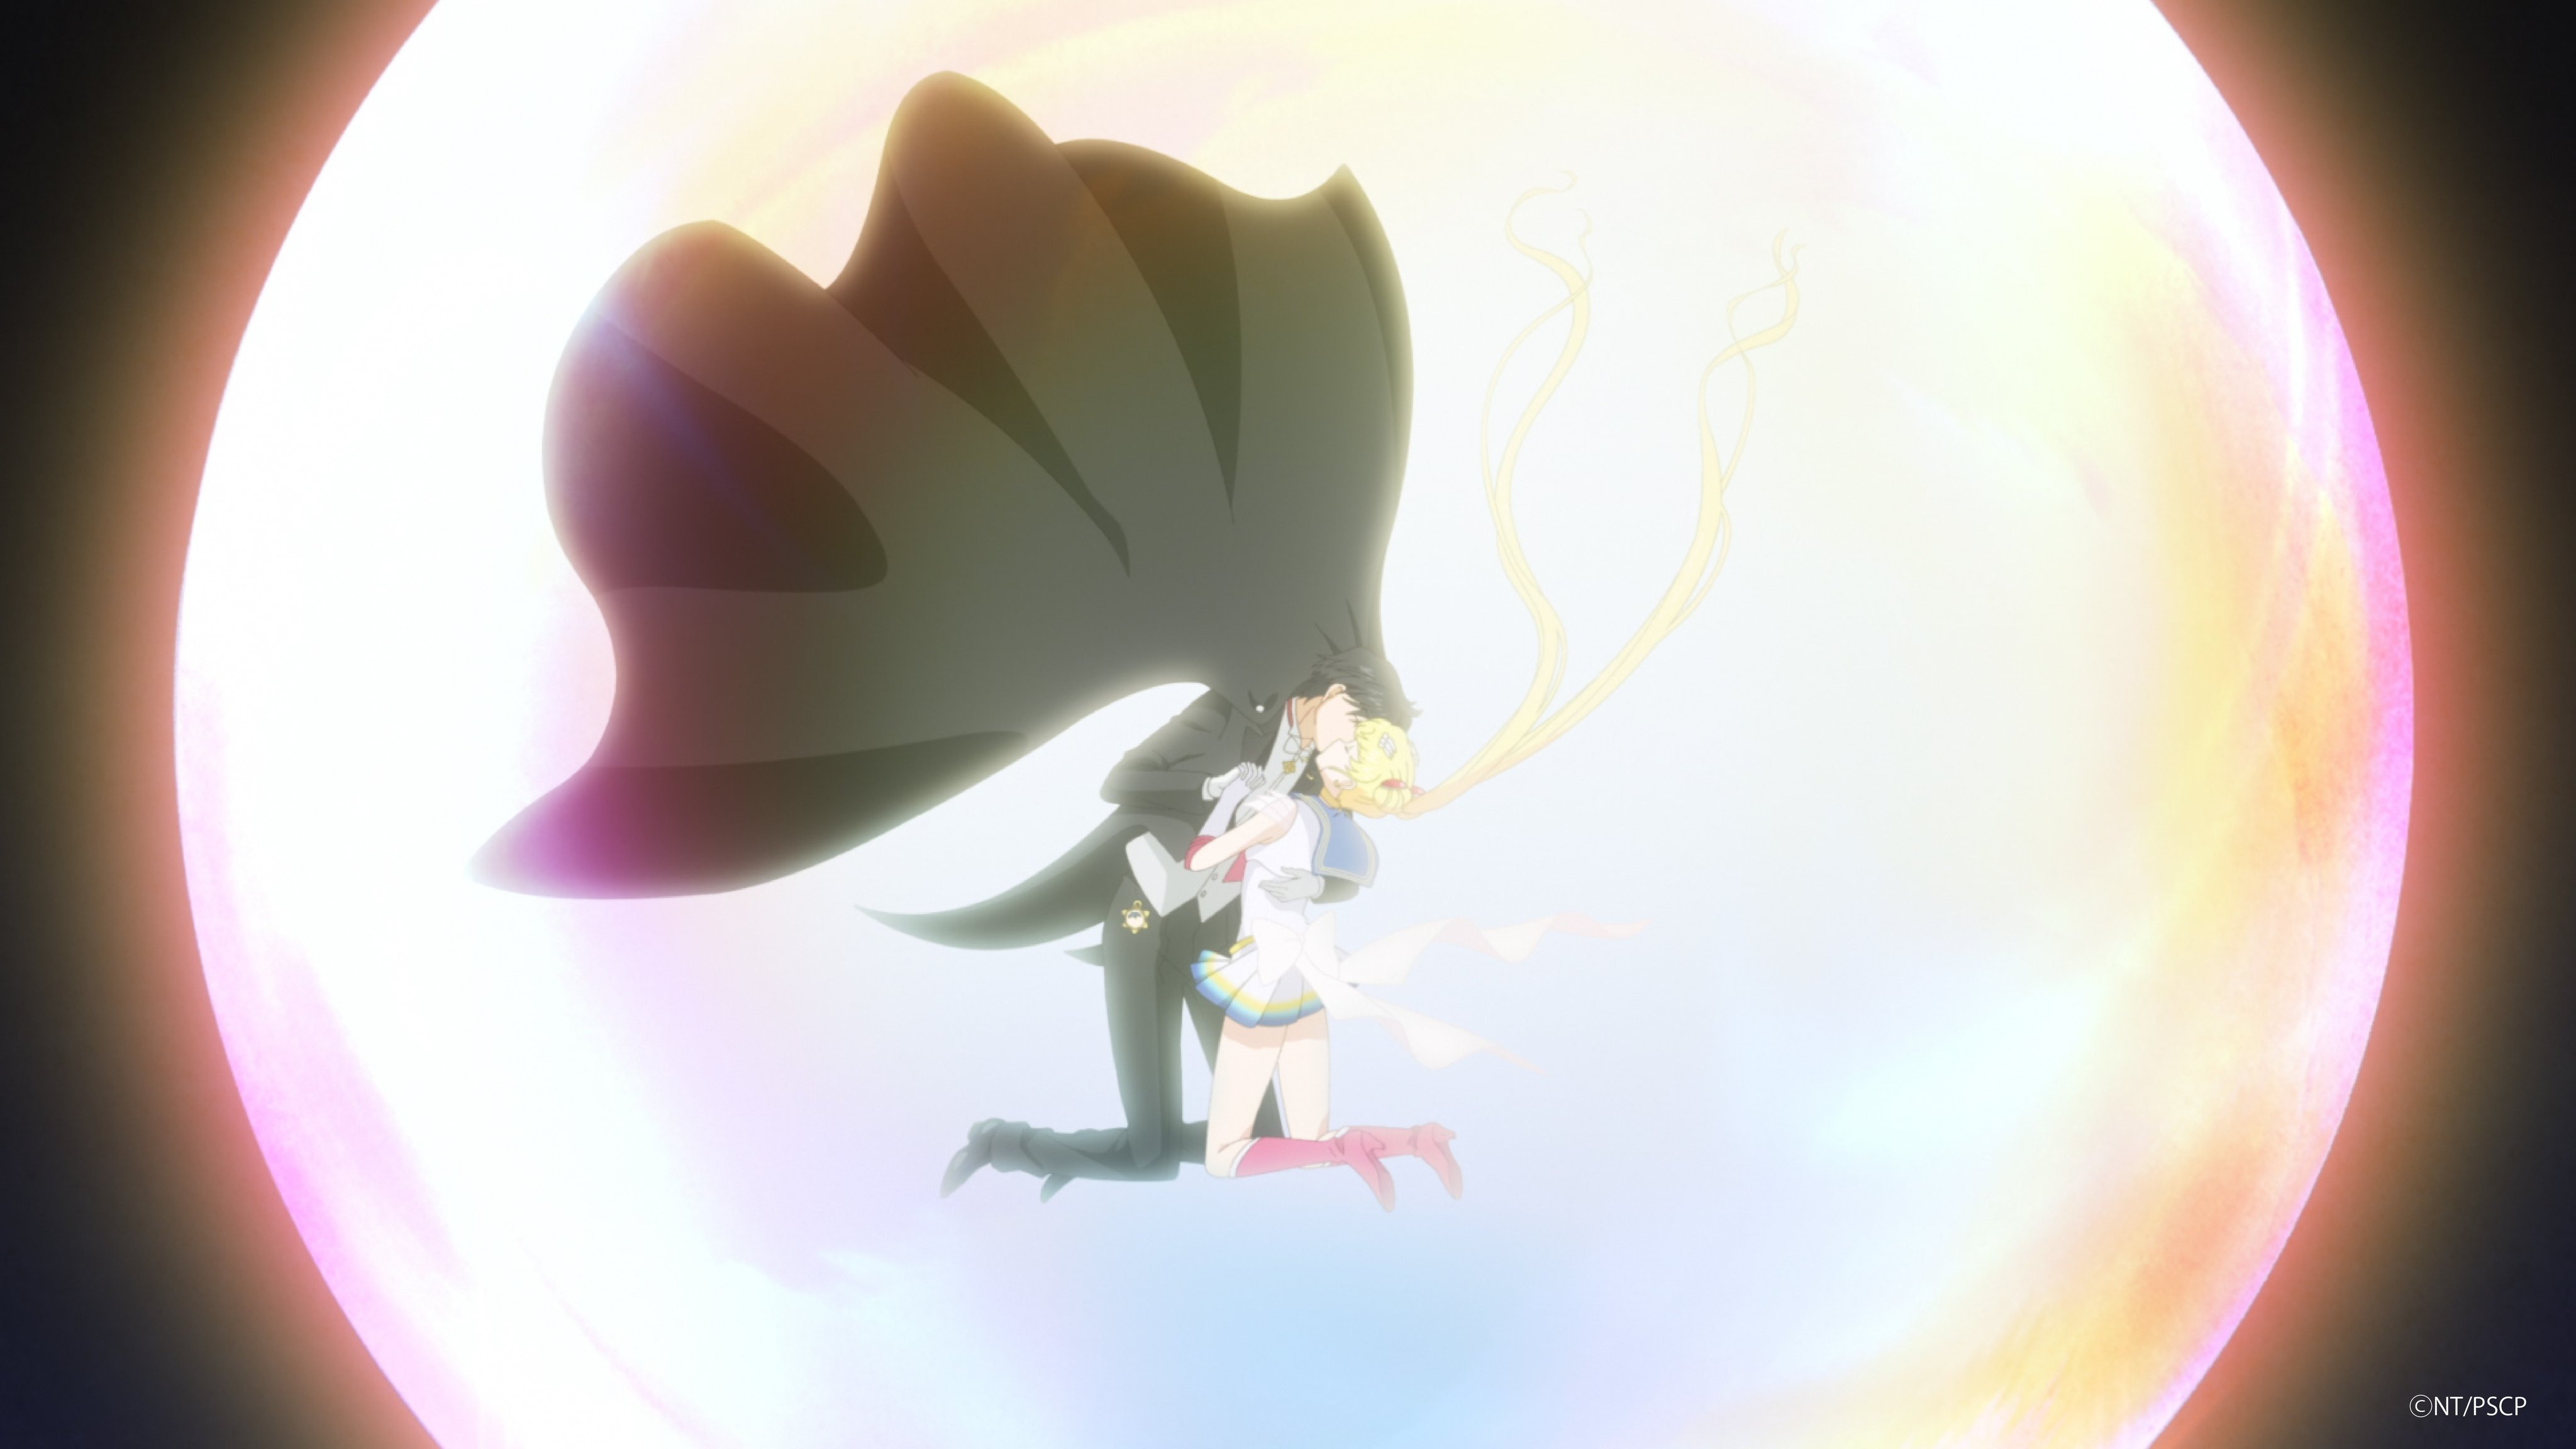 Sailor Moon Cosmos Anime Film Keeps It in the Family With Tuxedo Mask, Chibi Moon Reveal